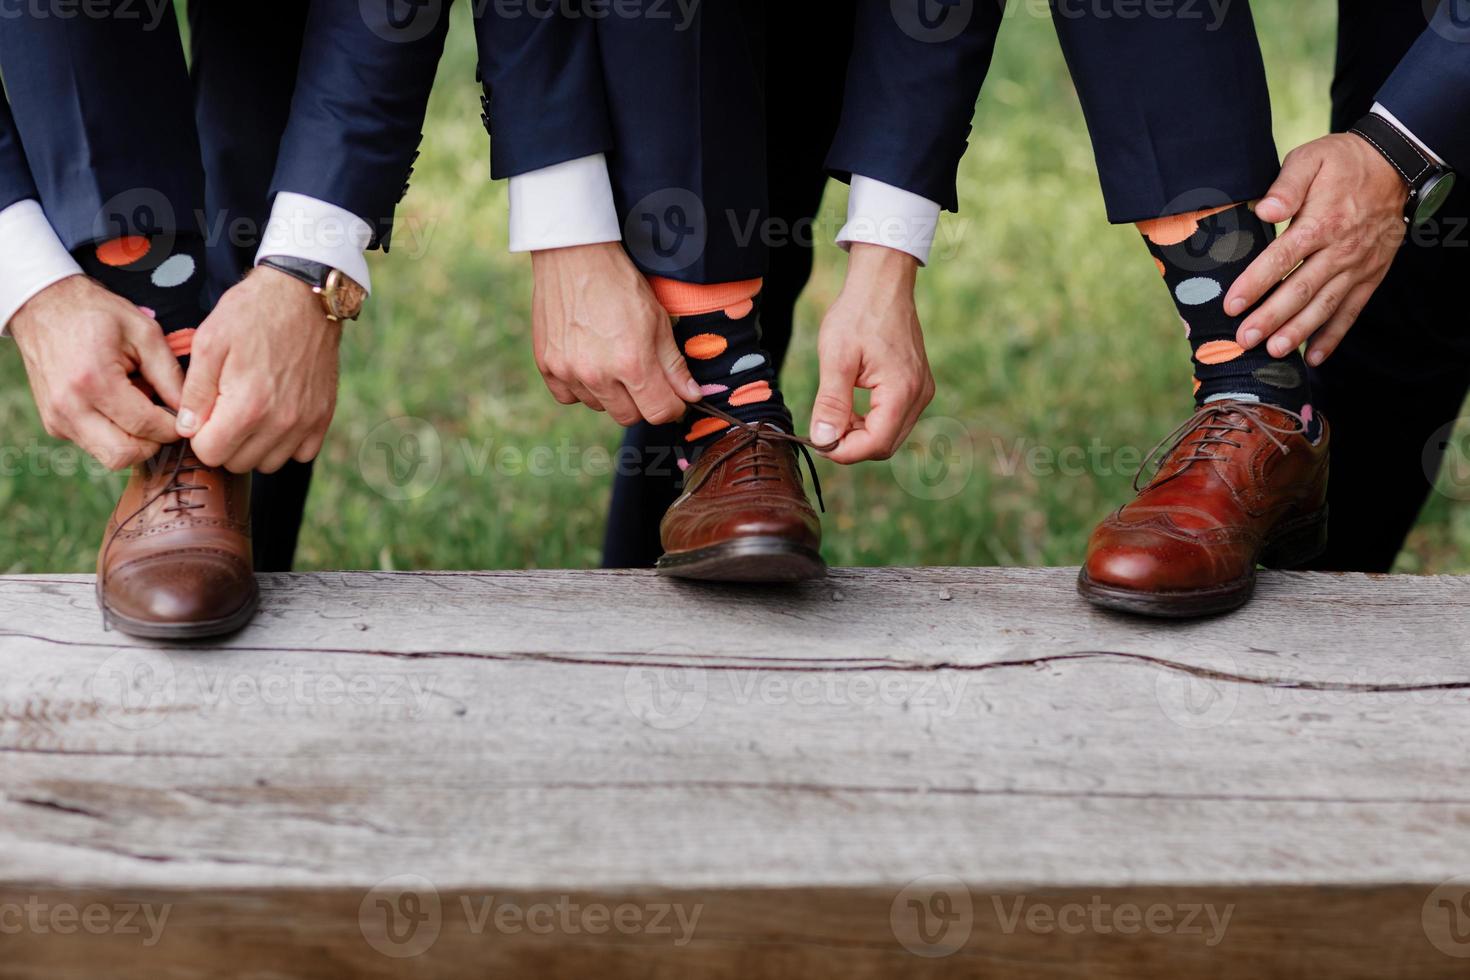 The men wears shoes with stylish socks. Stylish suitcase, men's legs, multicolored socks and new shoes. Concept of style, fashion, beauty and vacation. Tie the laces on the shoes. photo